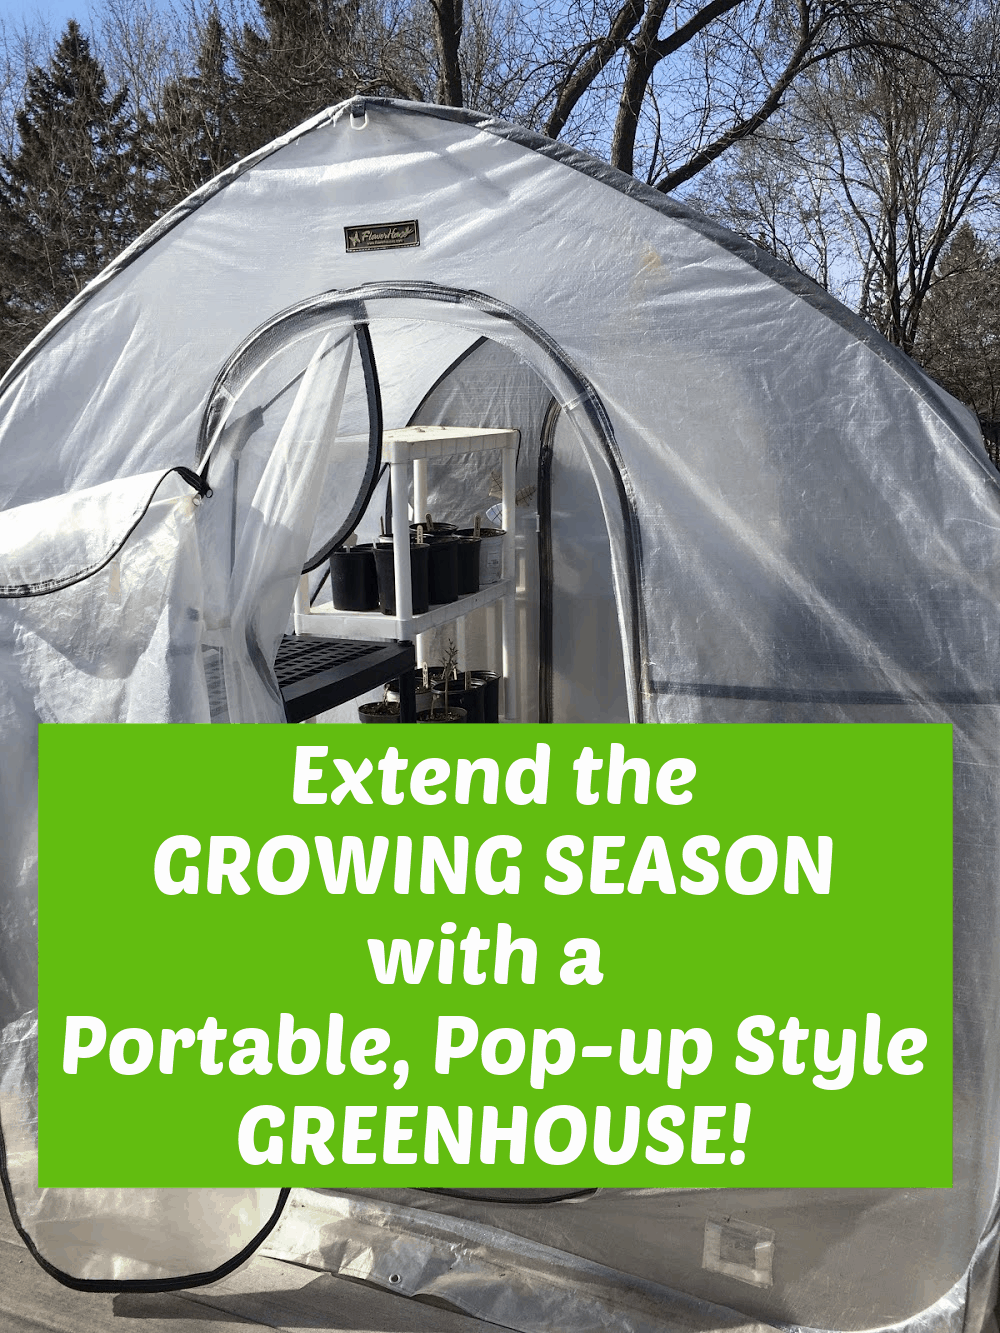 Image of a pop-up greenhouse with text overlay - extend the growing season with a pop-up style greenhouse